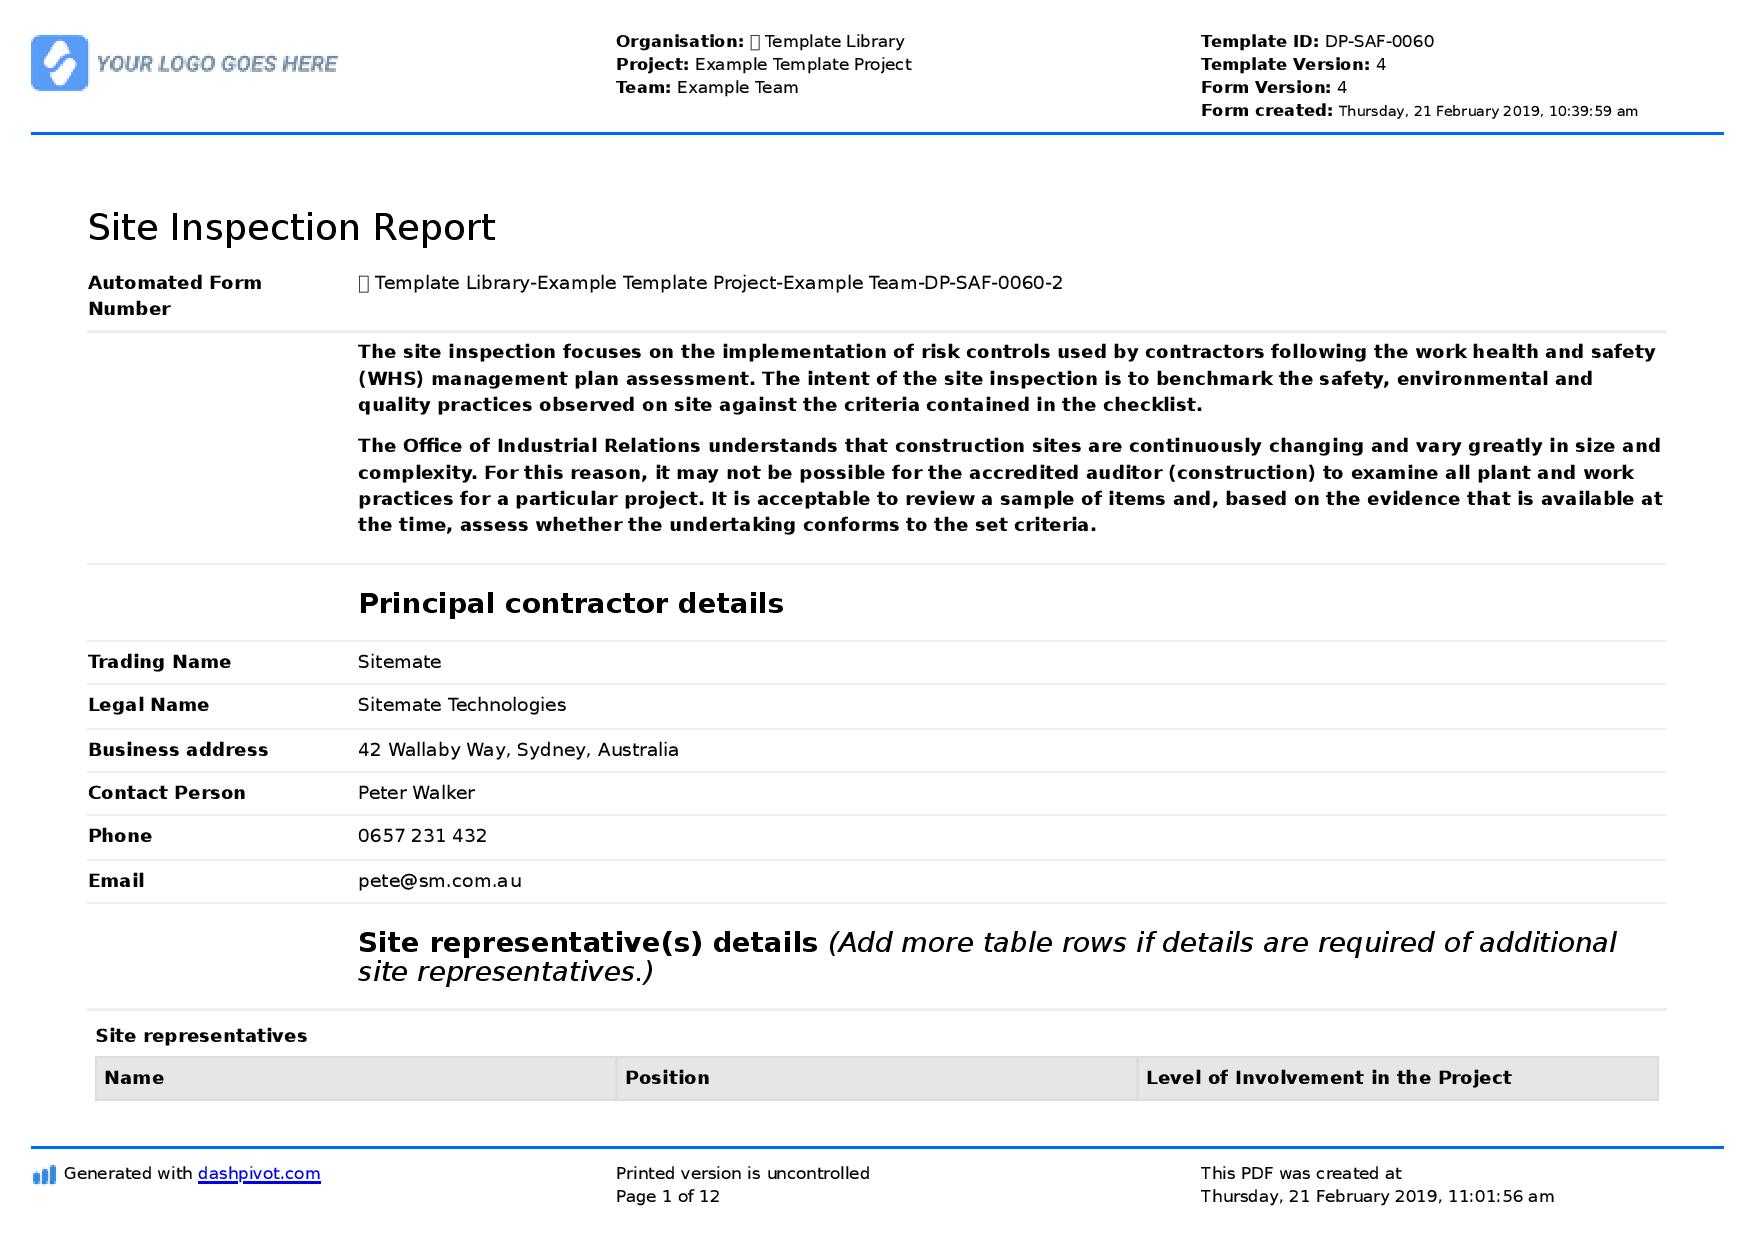 Site Inspection Report: Free Template, Sample And A Proven Within Engineering Inspection Report Template